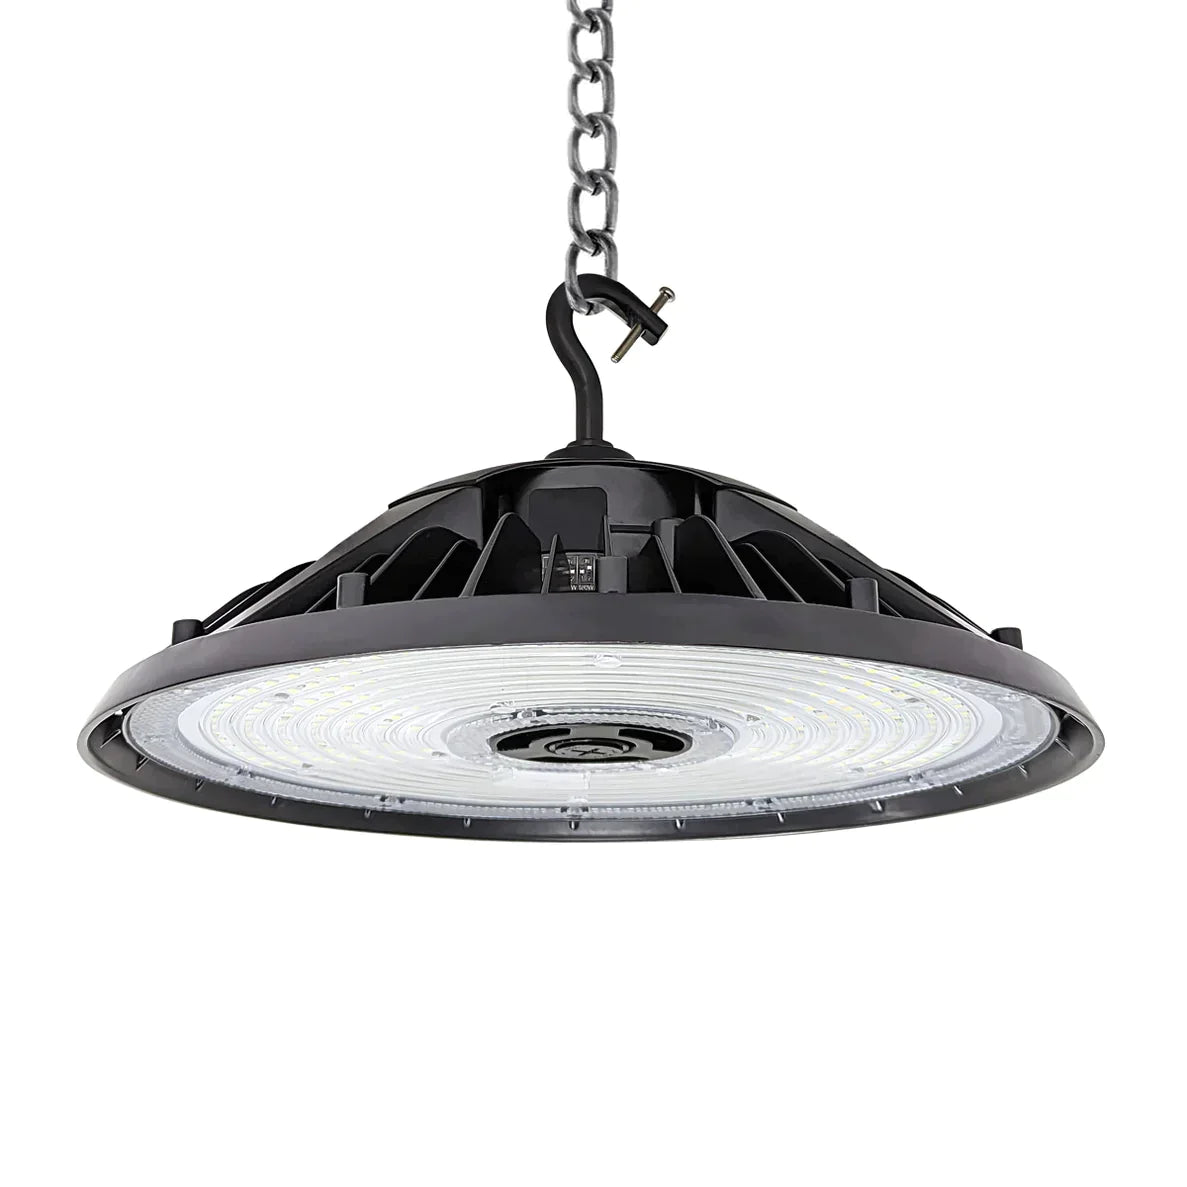 RHB04-150W Selectable UFO LED High Bay - Up to 23,000 Lumens